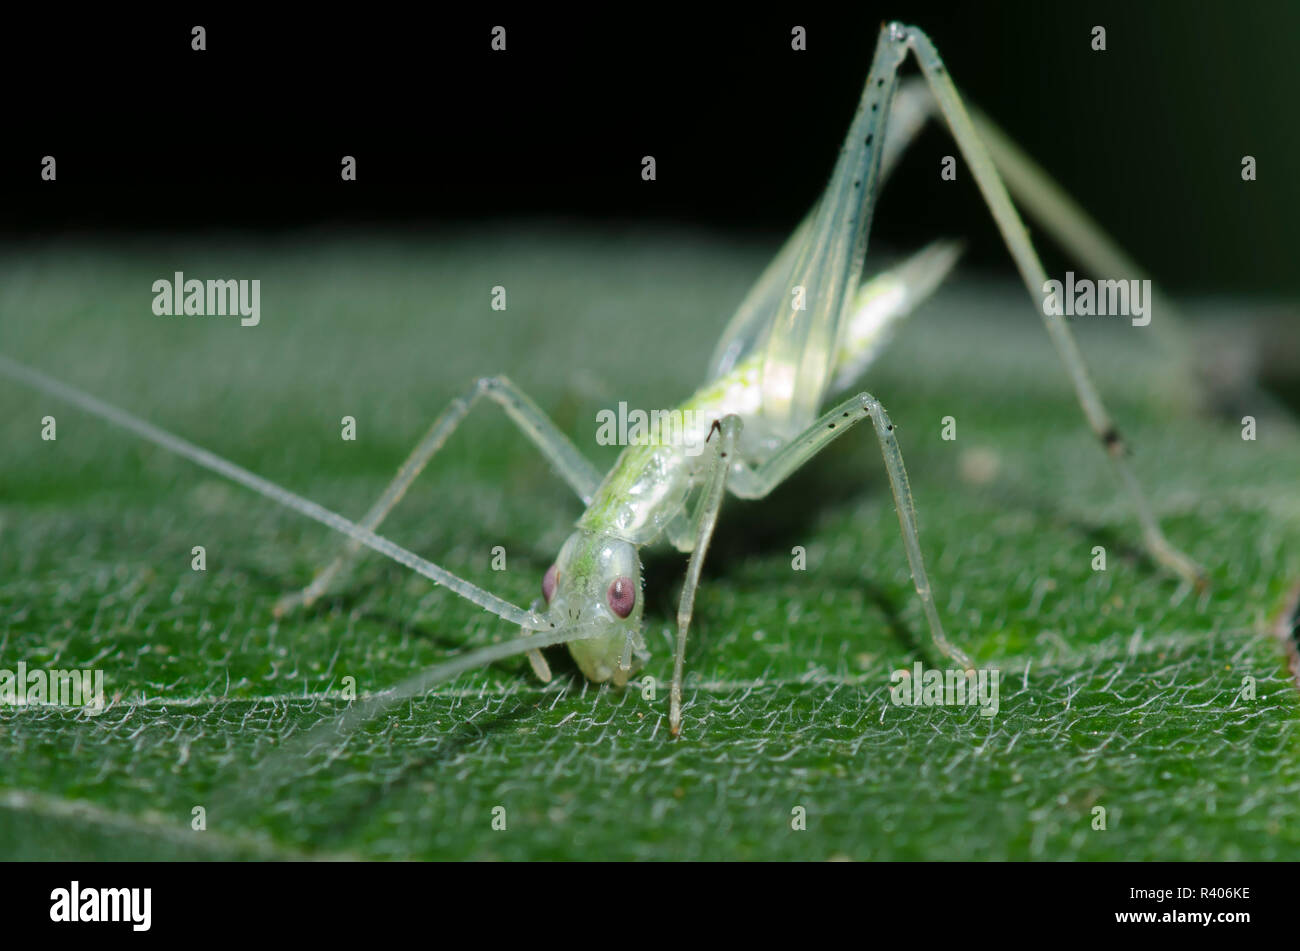 Narrow-winged Tree Cricket, Oecanthus niveus, nymph nibbling leaf surface Stock Photo